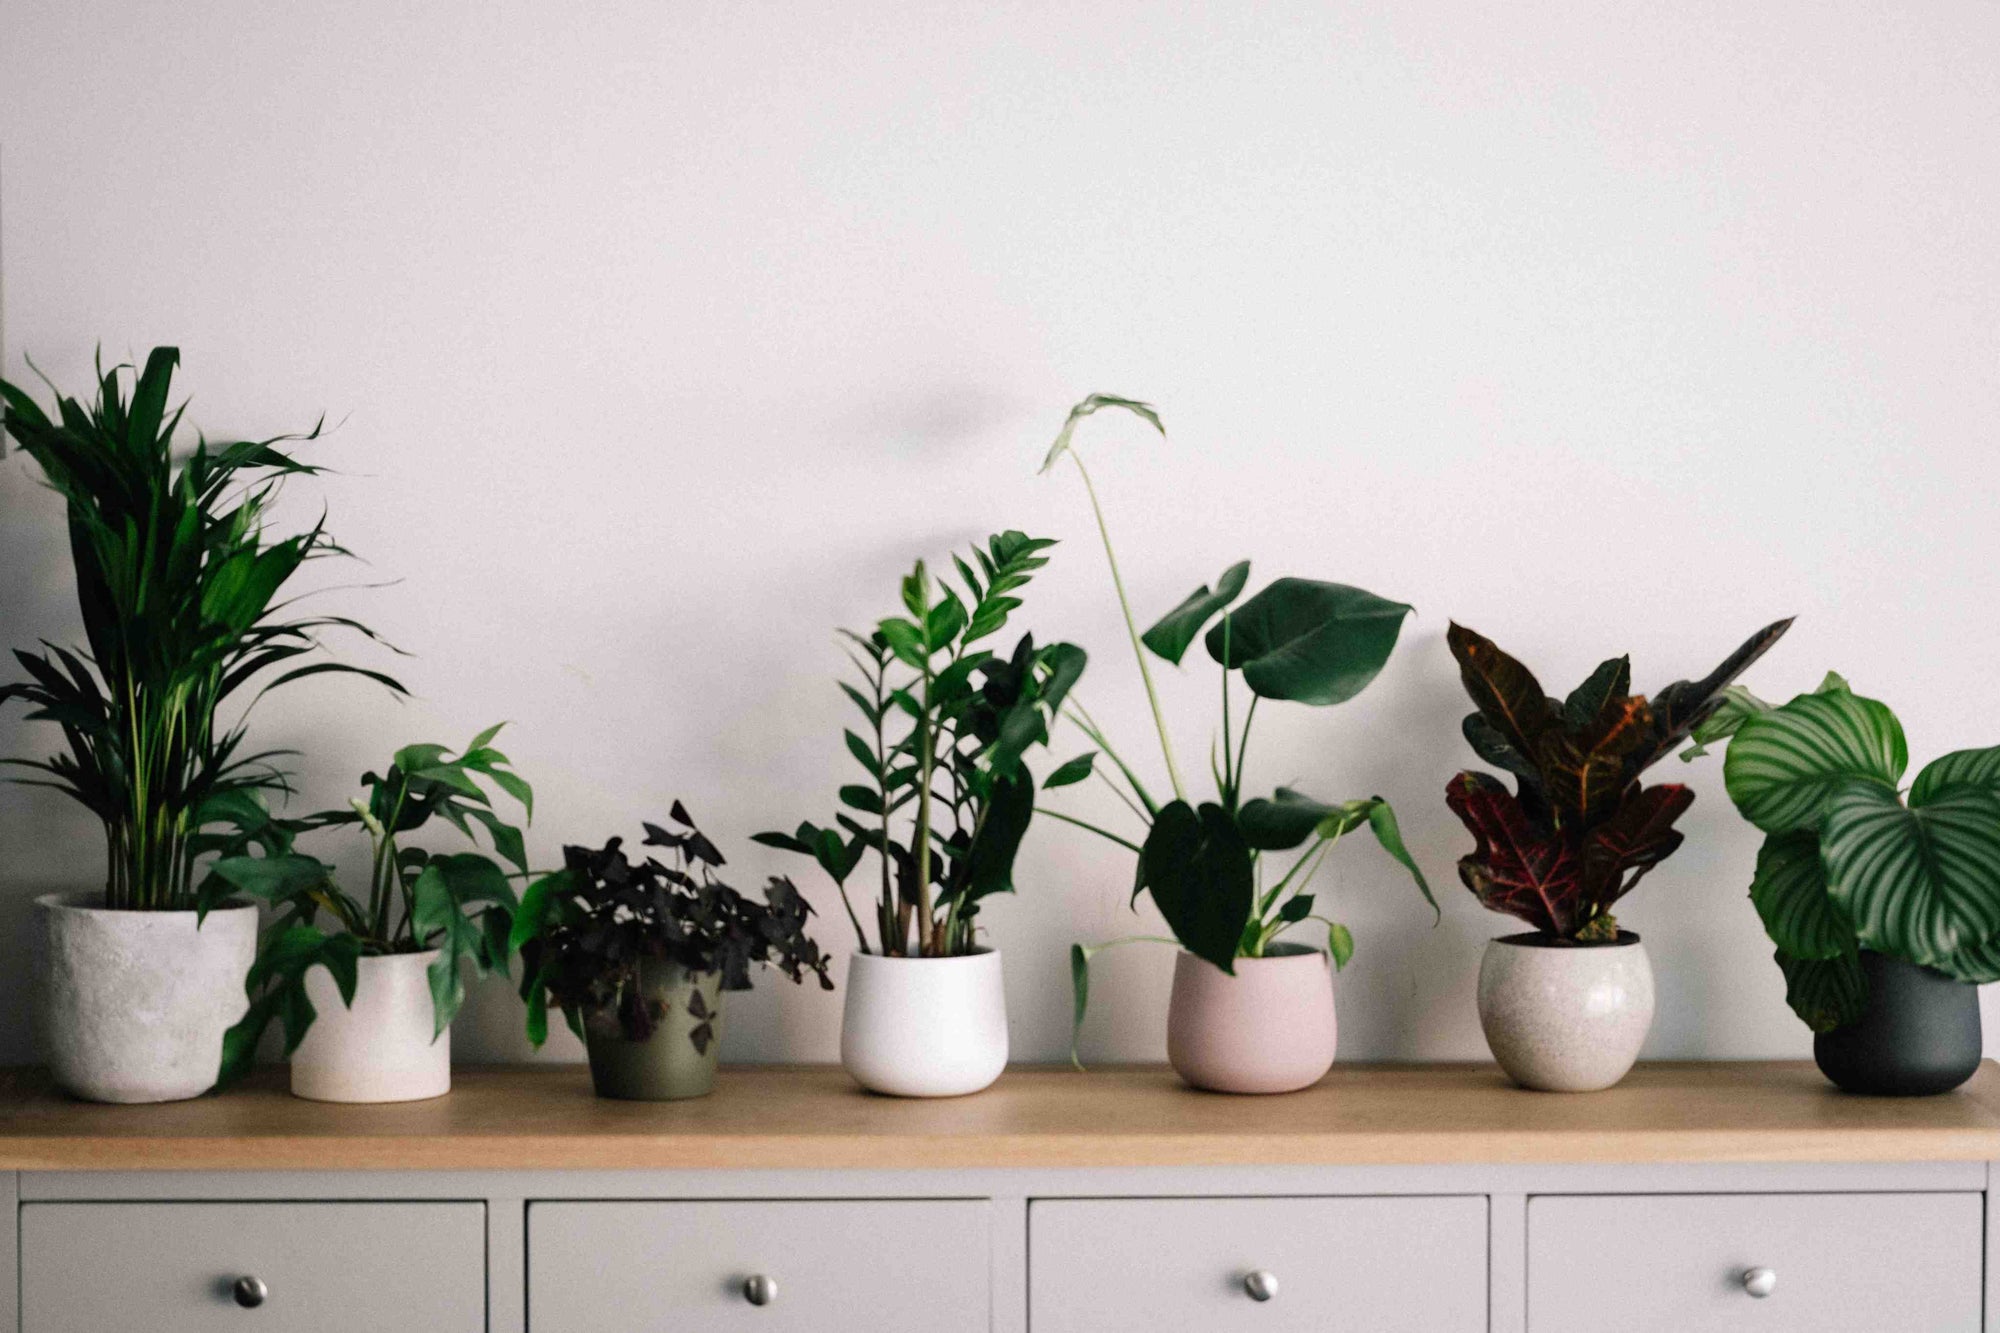 A row of indoor plants in white pots sitting on a side table with drawers